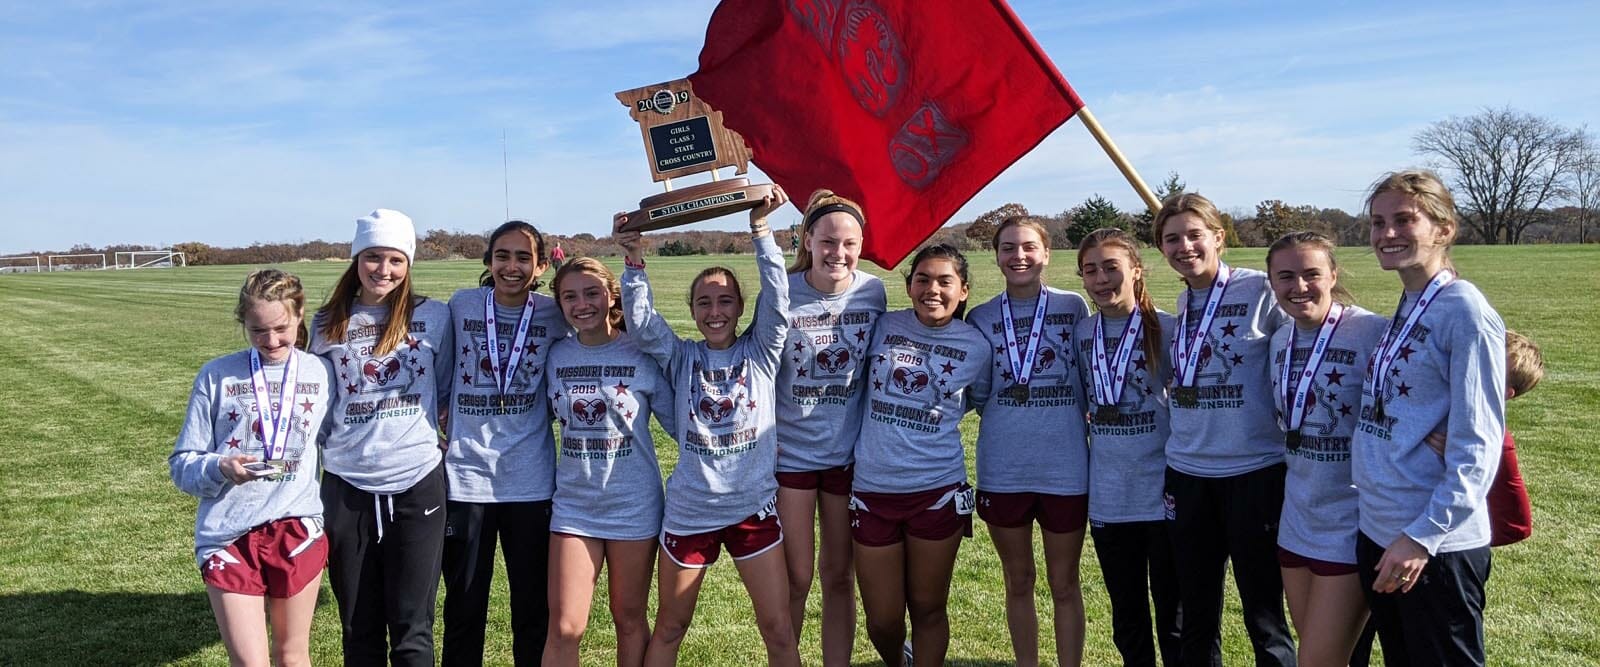 Cross Country Champions at State